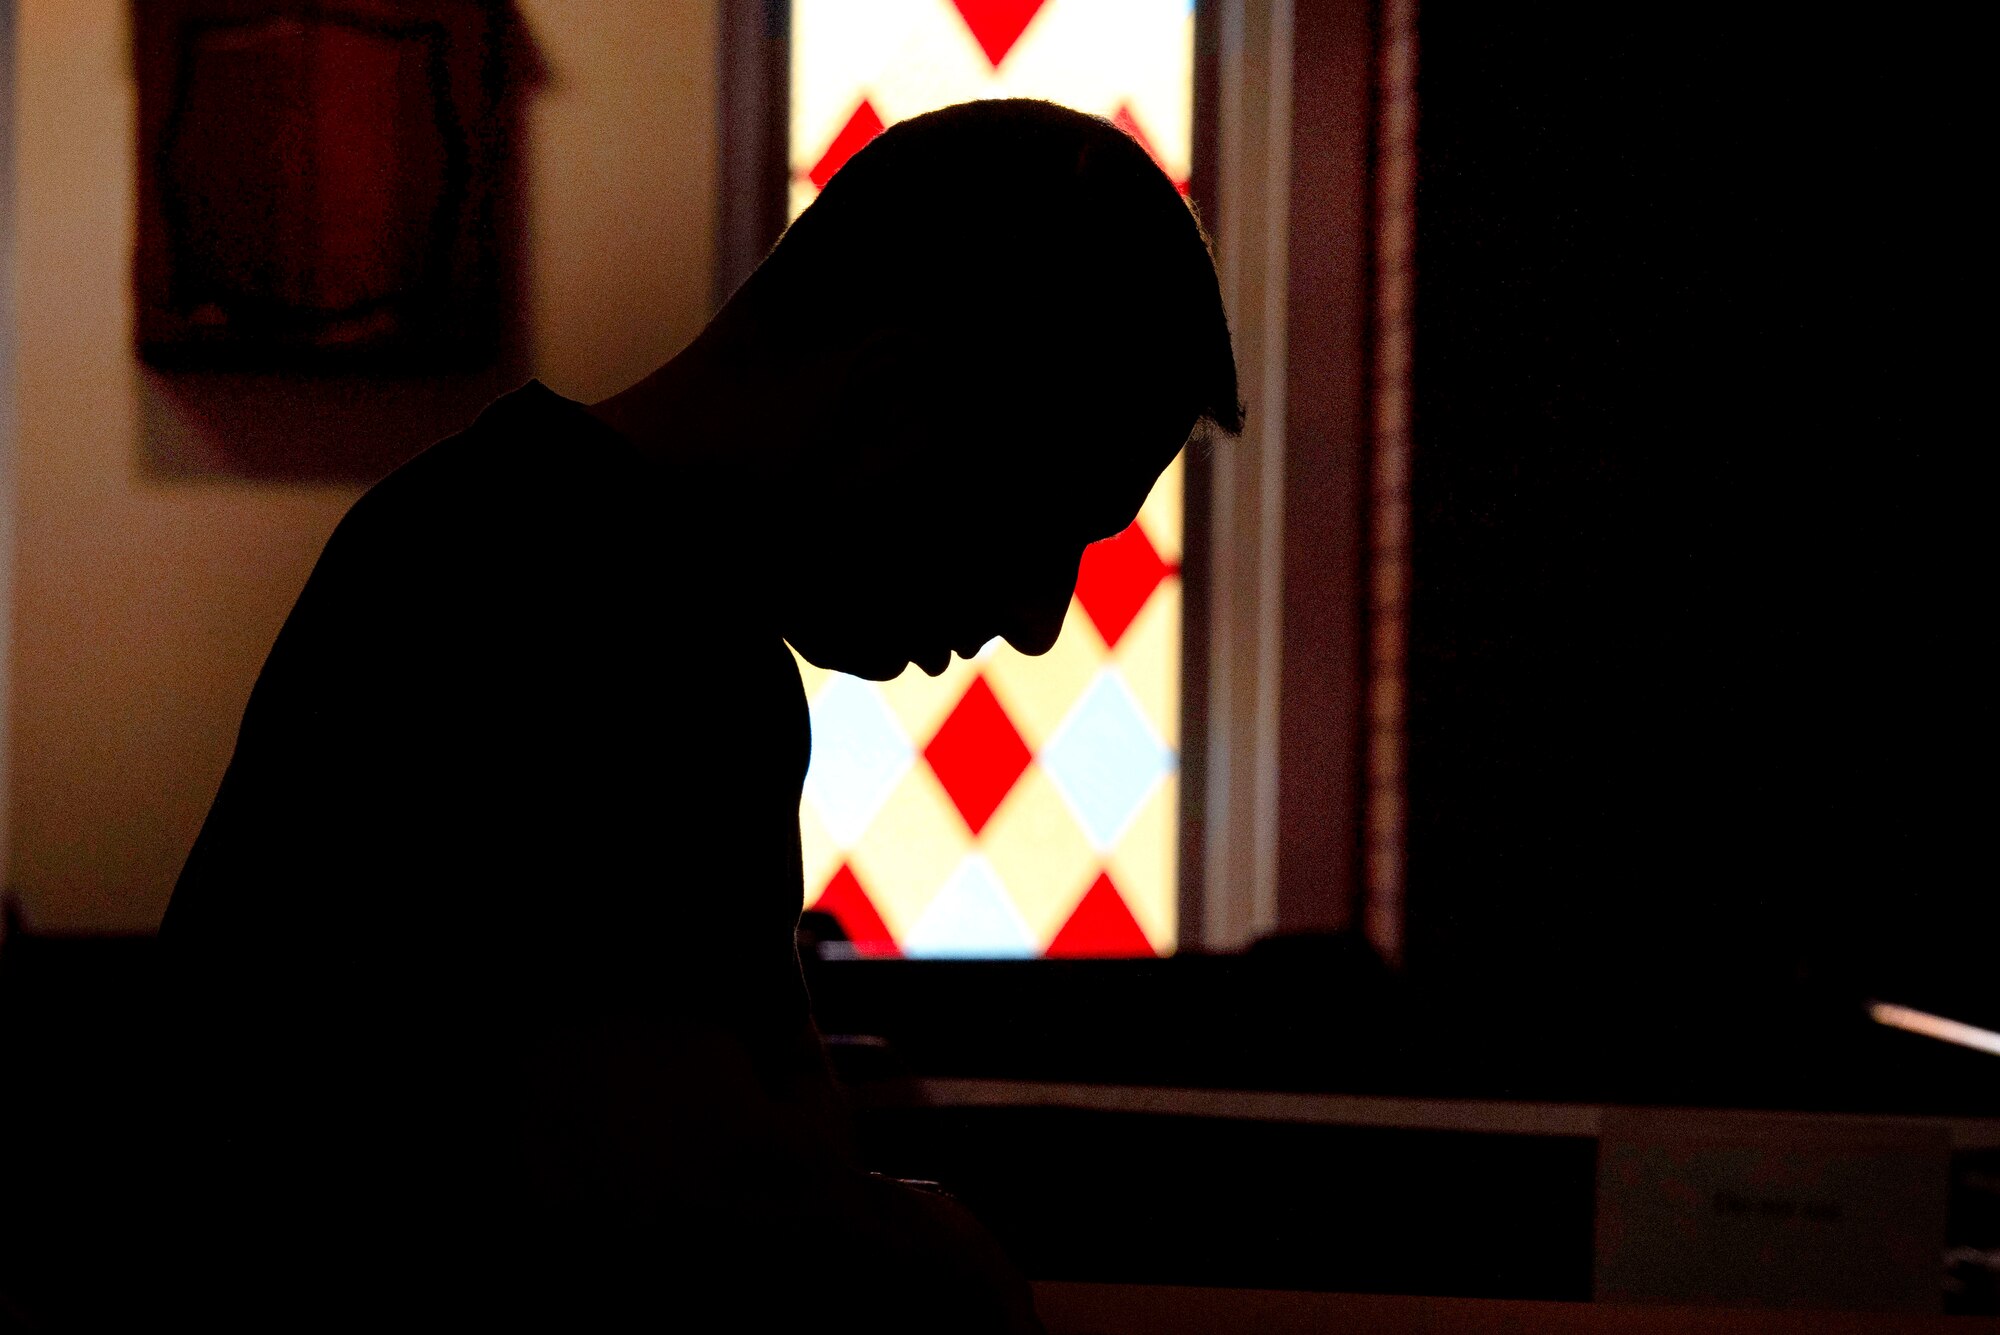 U.S. Air Force Lt. Col. Robert Orlando, 39th Medical Support Squadron commander, prays during a recorded worship service April 18, 2020, at Incirlik Air Base, Turkey. The 39th Air Base Wing chapel modified its operations to continue supporting the spiritual needs of Airmen while maintaining COVID-19 precautions according to Centers for Disease Control guidelines. (U.S. Air Force photo by Staff Sgt. Joshua Magbanua)